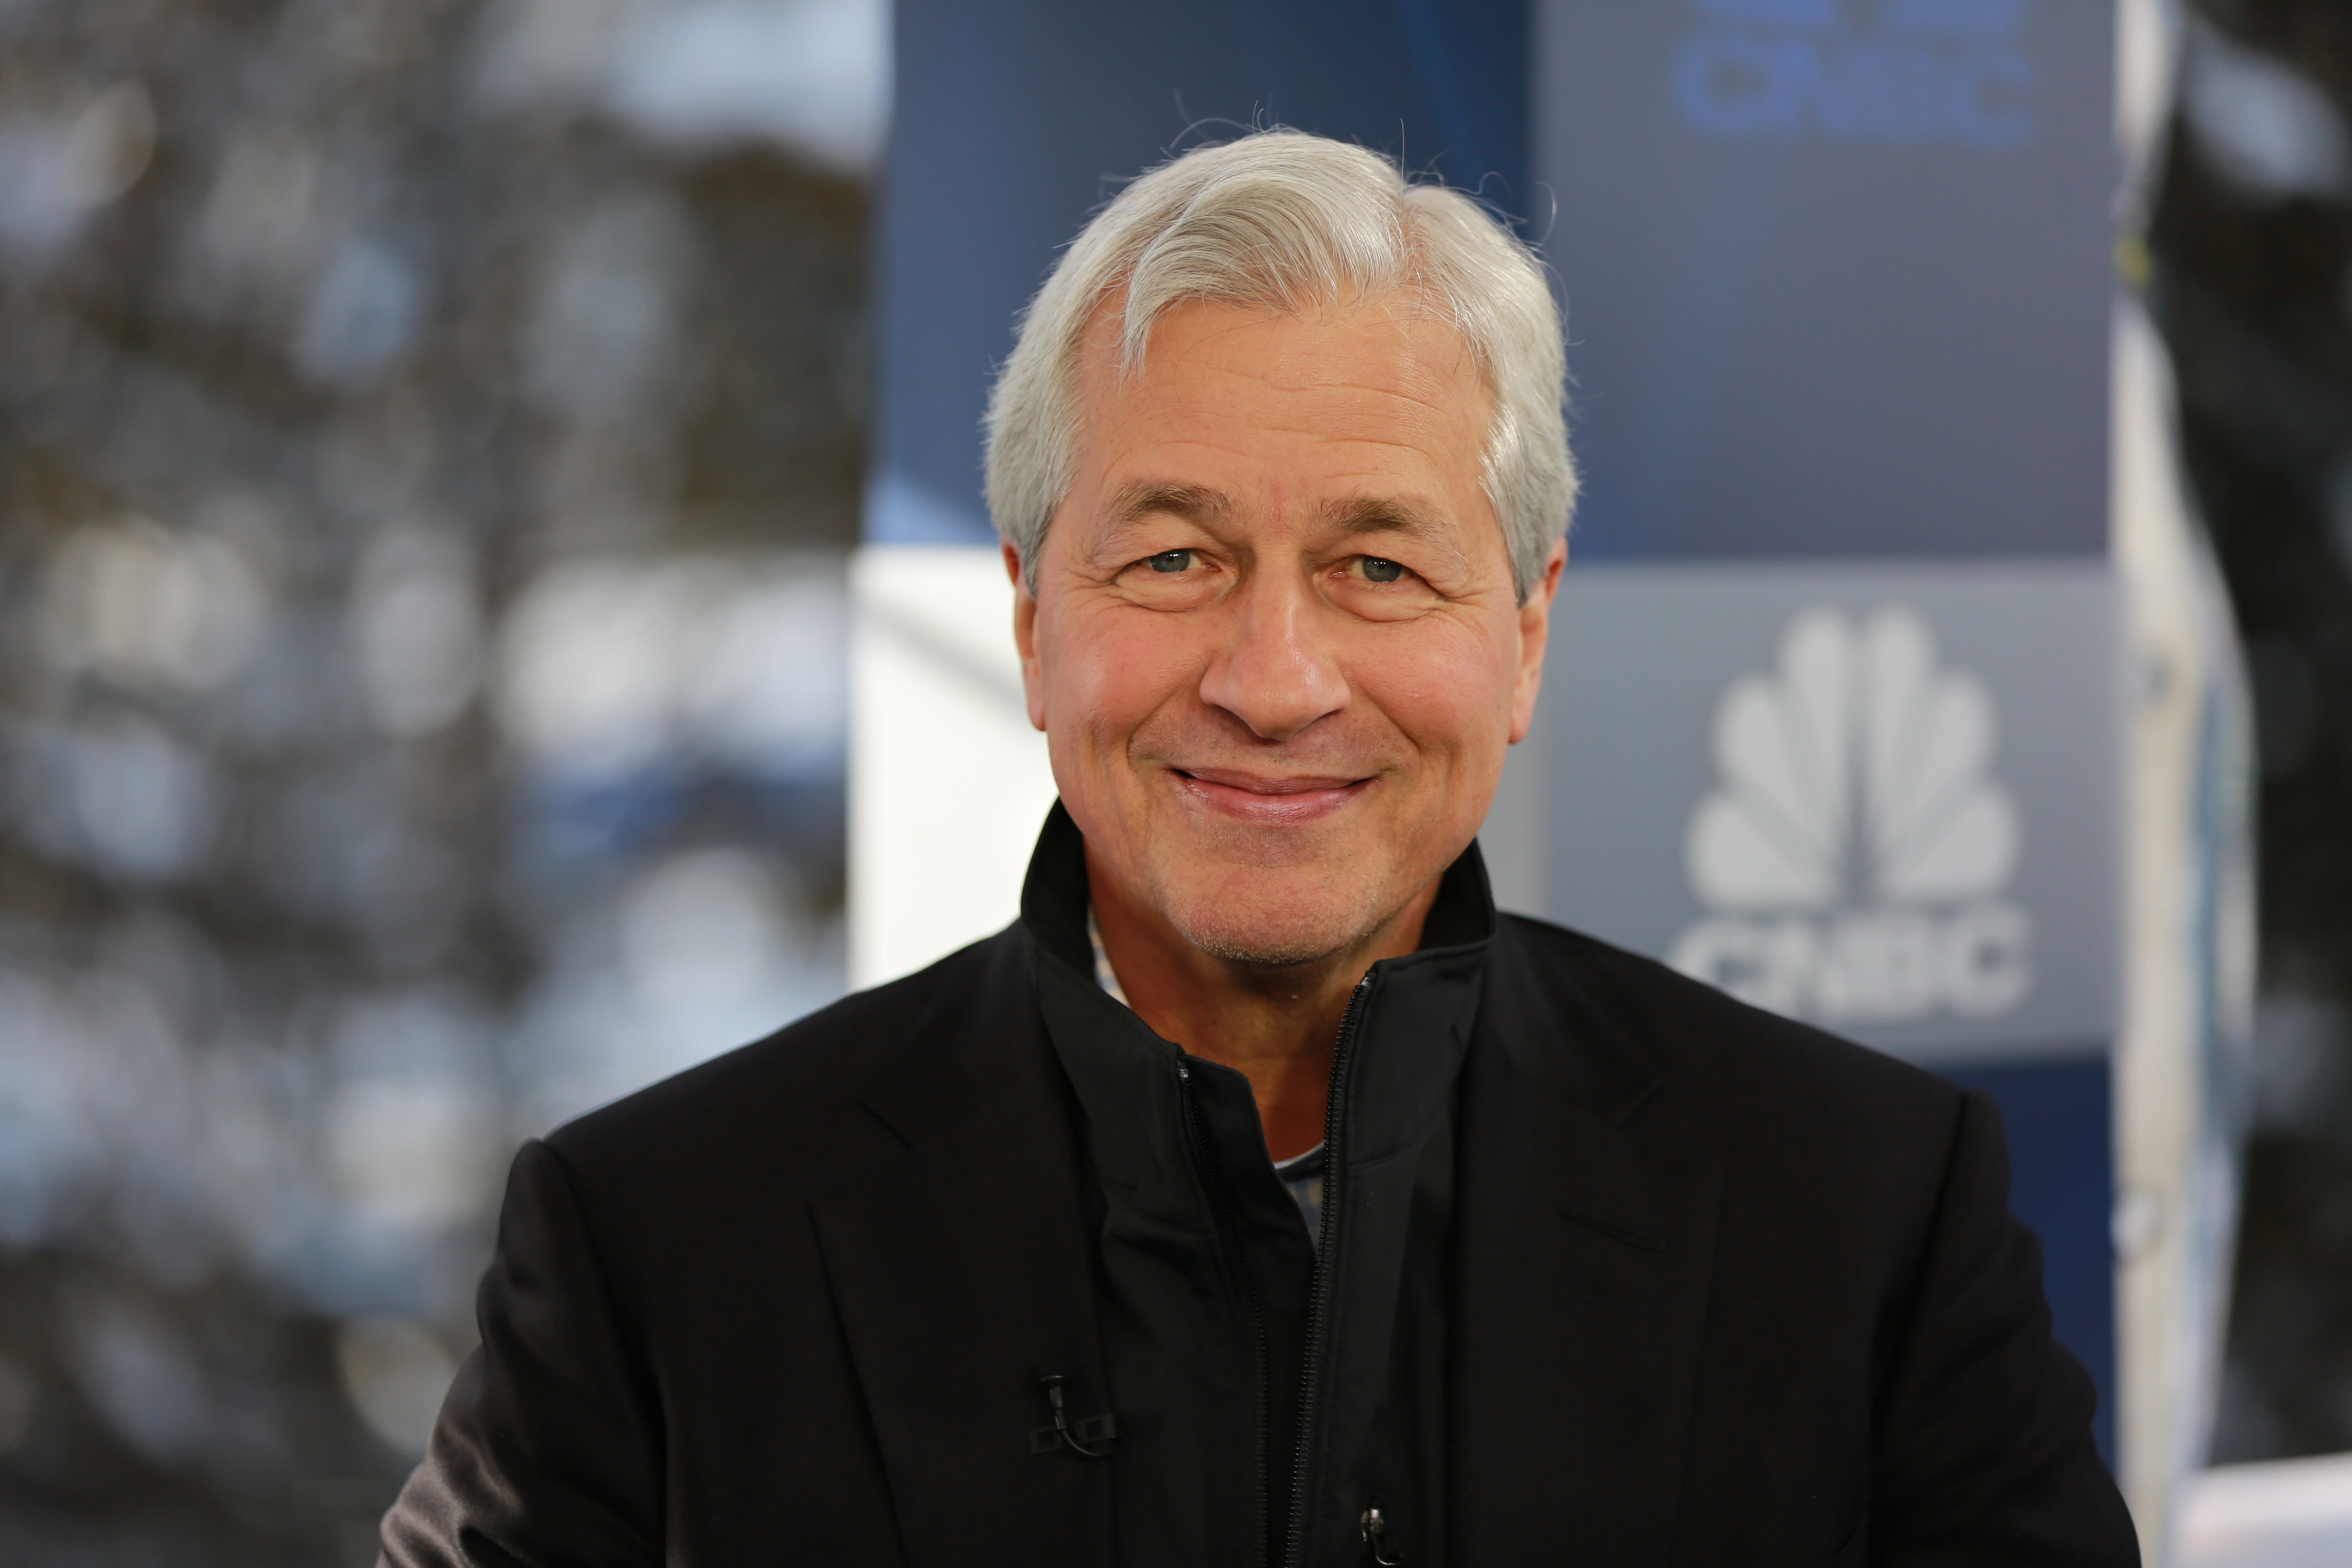 Jamie Dimon says economic boom is fueled by spending deficit, vaccines could “easily arrive in 2023”